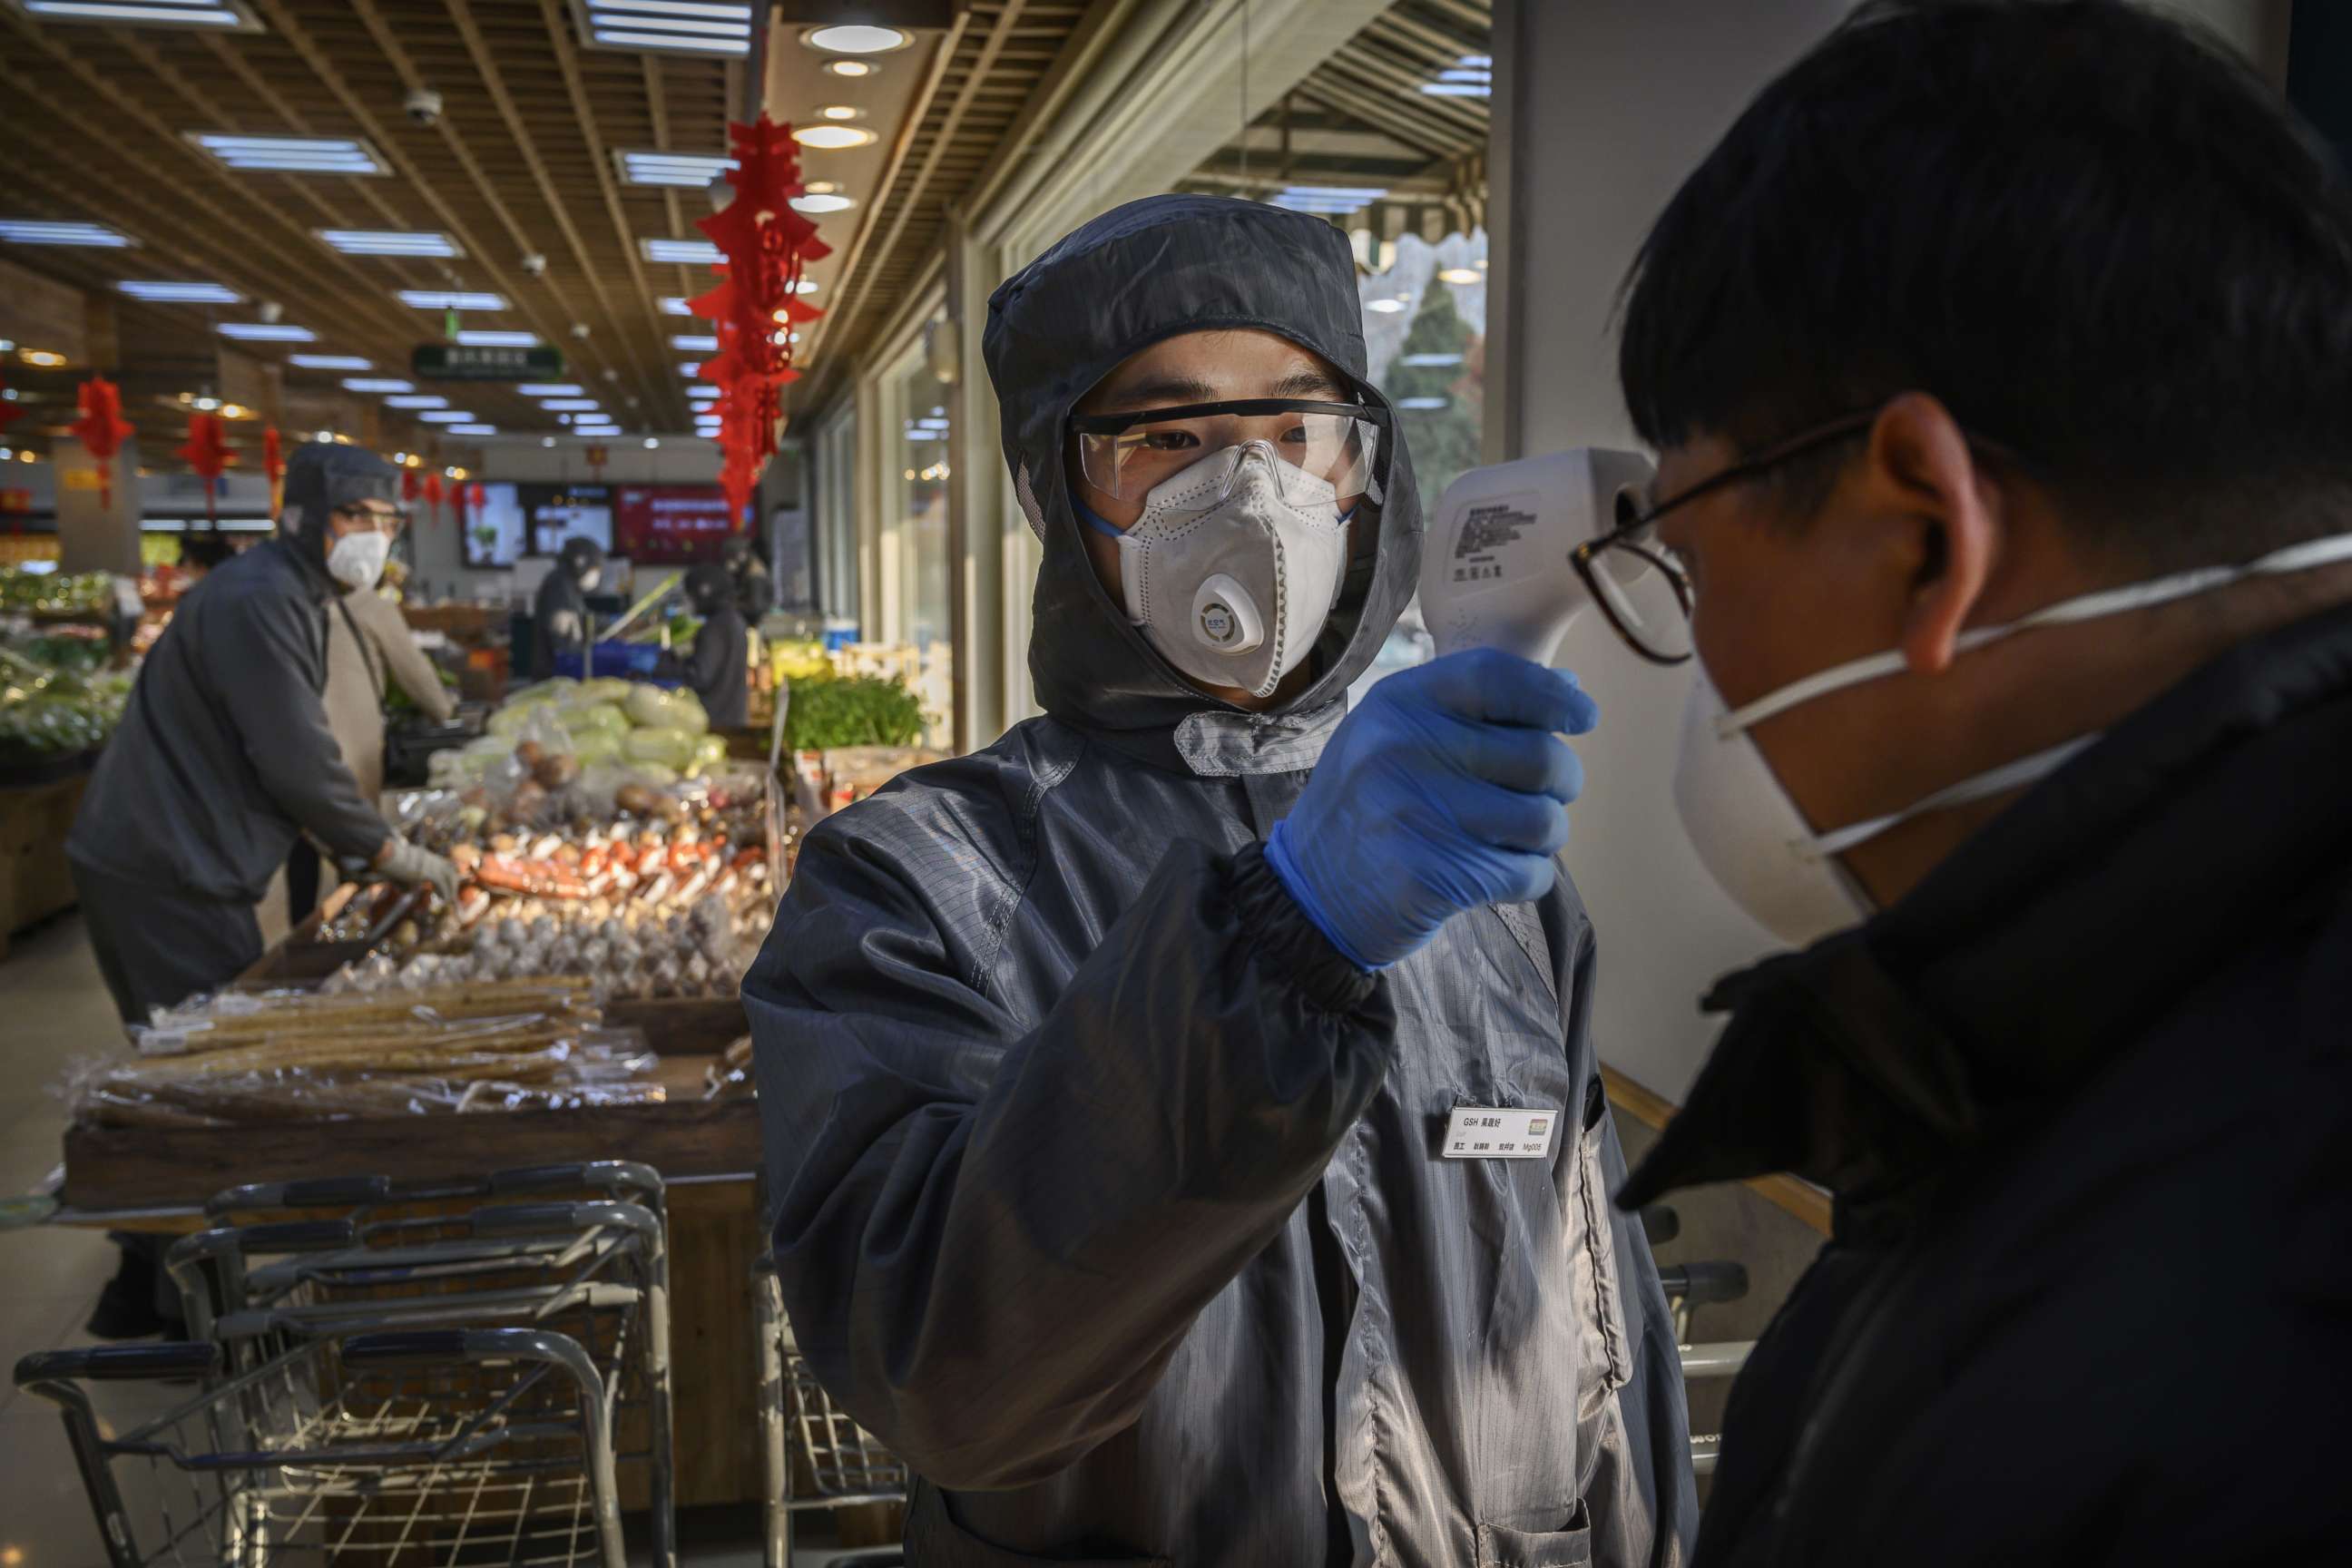 PHOTO: A worker checks the temperature of a customer amid a coronavirus outbreak as he wears a protective suit and mask at a supermarket in Beijing, China, on Feb. 11, 2020.